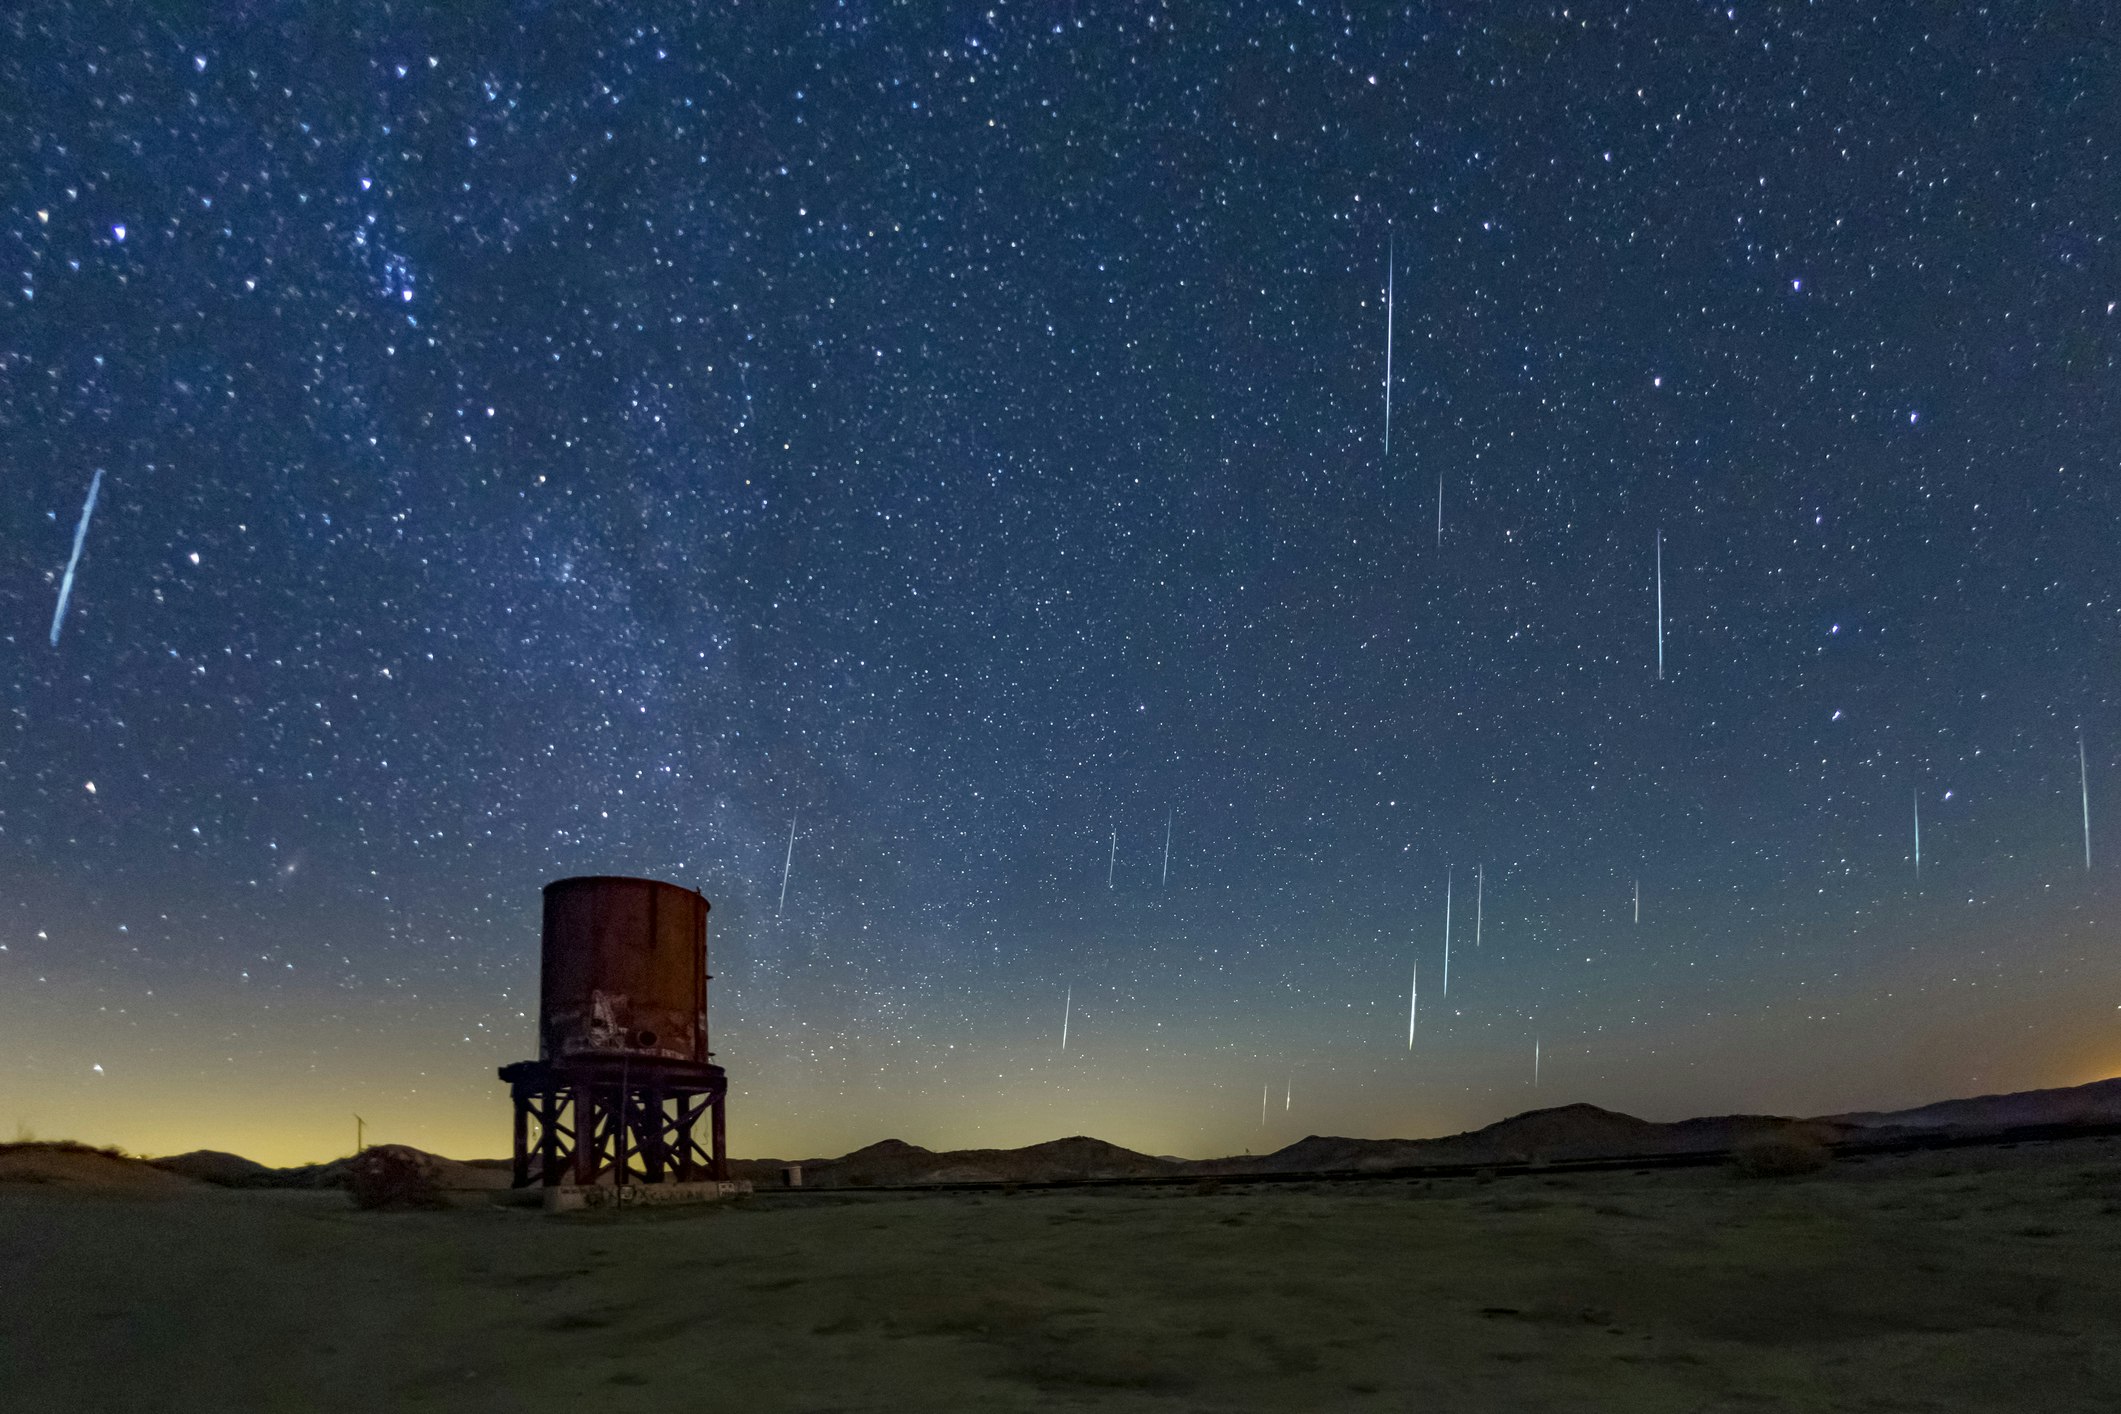 The Geminids Meteor Show in 2017 falls over Anza Borrego Desert State Park. The sky is a bright, warm indigo blue dotted with white and light blue stars and streaks from the falling meteors. The horizon is a light yellow or deep orange and framed by low mountains and hills. In the mid ground is a red water tower, part of the old Dos Cabezas Siding 